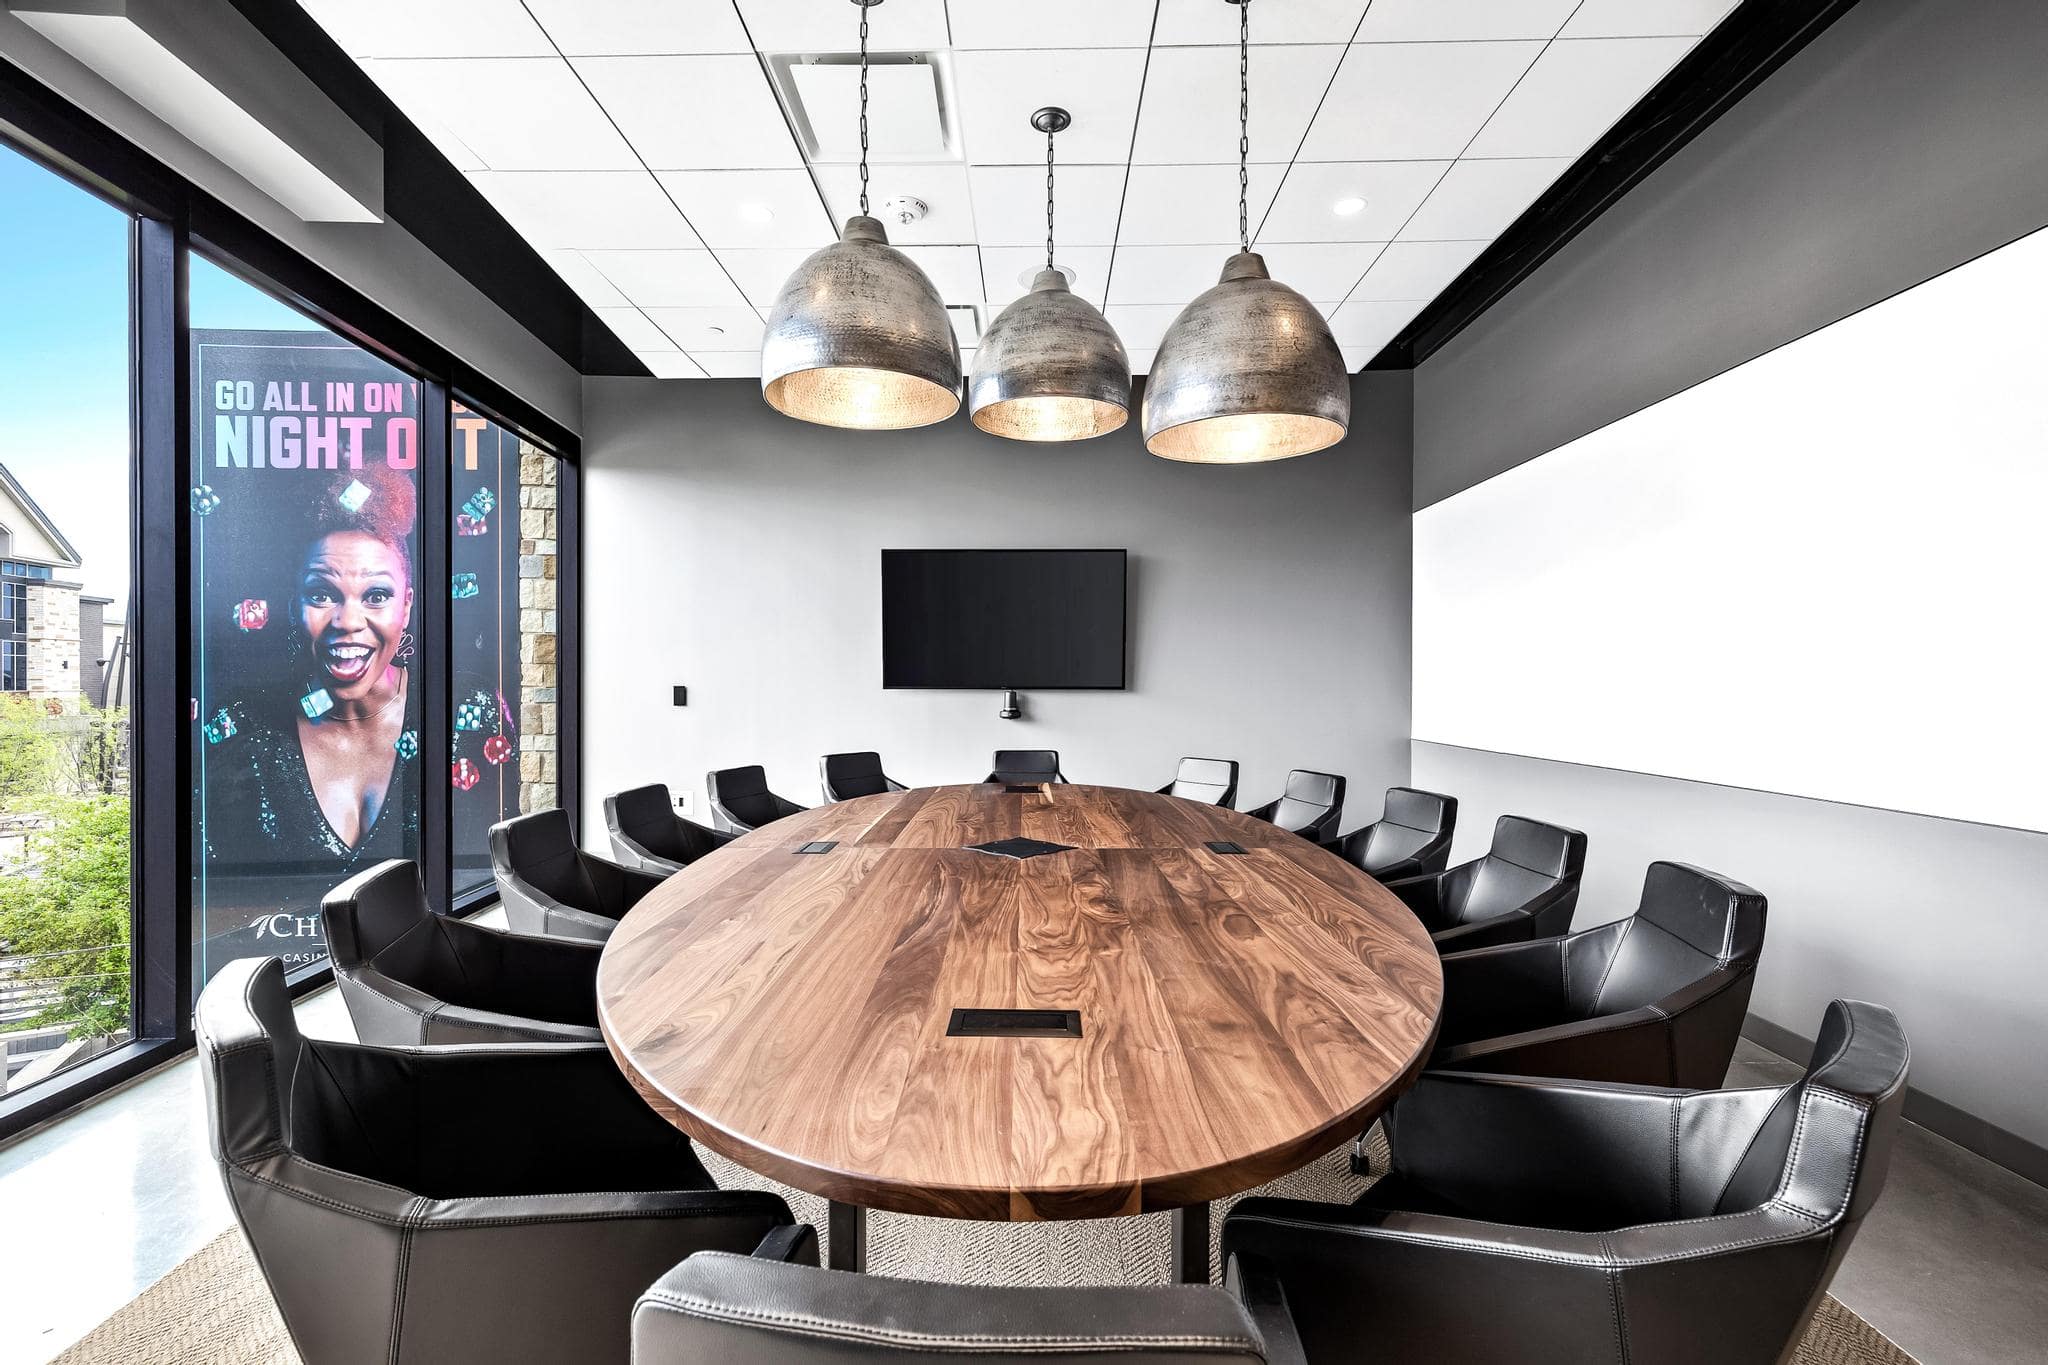 Summit, luxury boardroom with round table seating up to 14 people